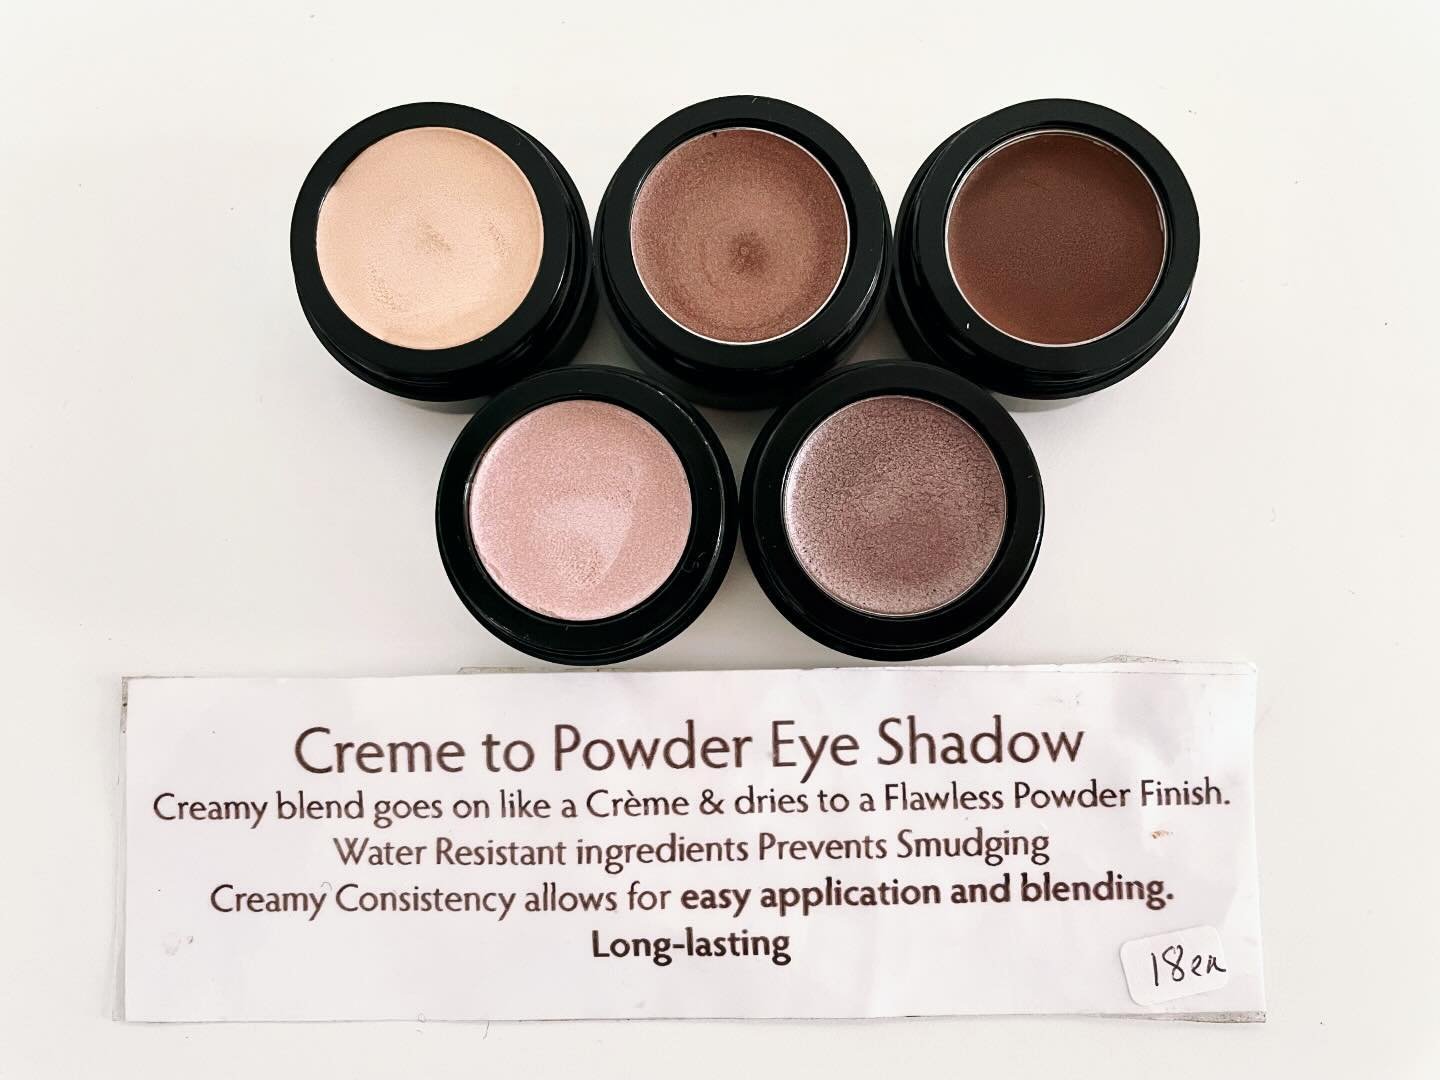 Glide onto the lid to give yourself a glow on your lids! Goes on silky, creamy dries to a powder finish- a truly effortless eye shadow product to wear ❤️